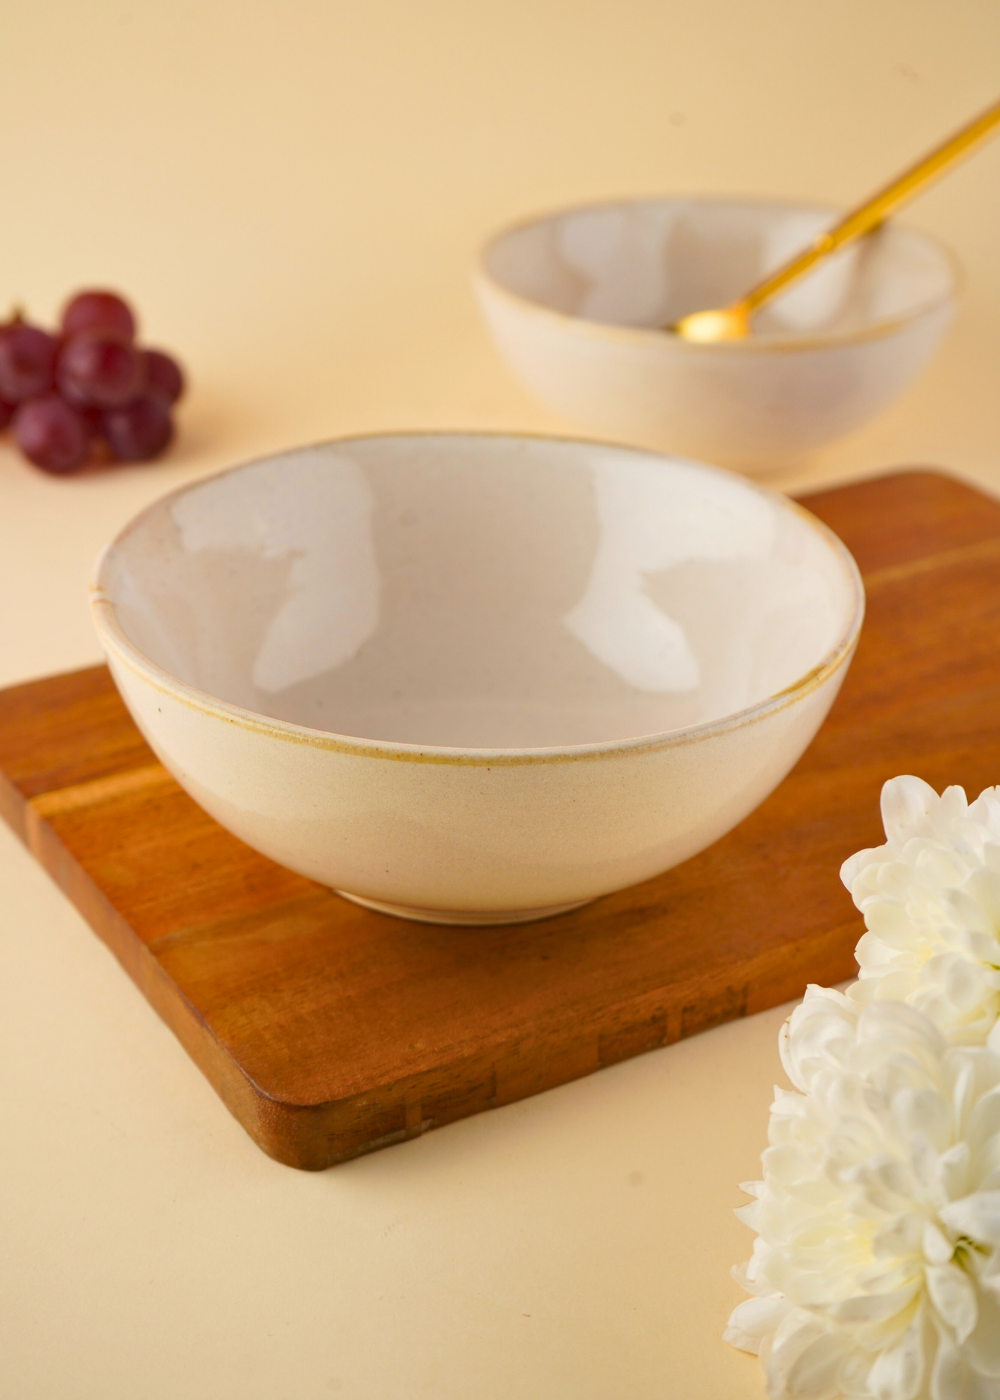 pearl white curry bowl with ceramic material